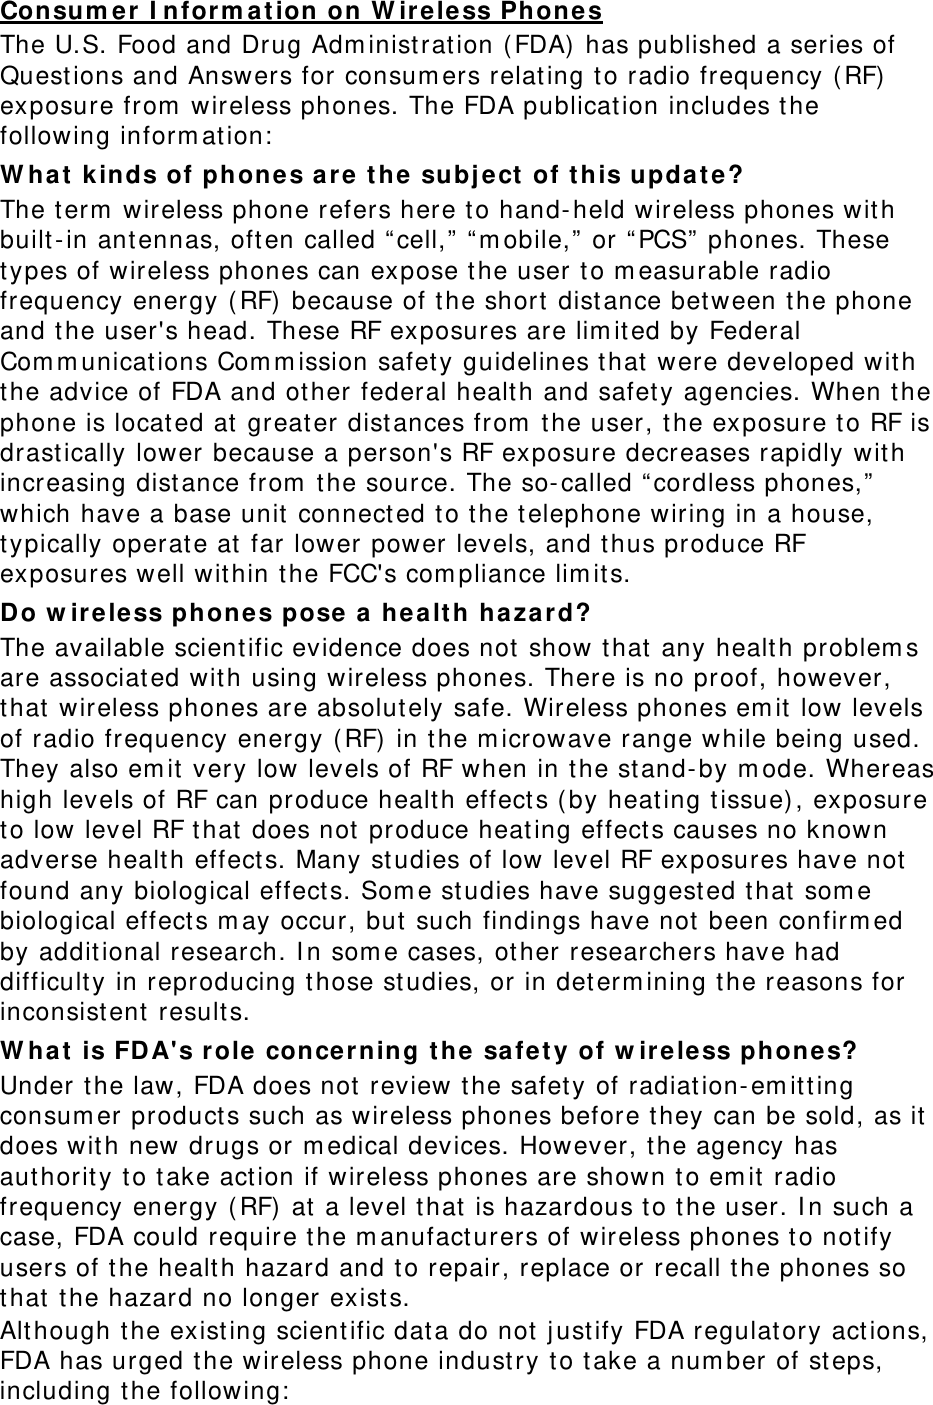 Consum er I nform a tion on W irele ss Phones The U.S. Food and Drug Adm inist ration ( FDA)  has published a series of Quest ions and Answers for consum ers relating t o radio frequency ( RF) exposure from  wireless phones. The FDA publication includes the following inform at ion:  W ha t k in ds of phones ar e  t he subj ect  of t his upda t e? The t erm  wireless phone refers here to hand- held wireless phones with built- in antennas, oft en called “ cell,”  “ m obile,”  or “ PCS”  phones. These types of wireless phones can expose t he user t o m easurable radio frequency energy ( RF) because of t he short  dist ance between the phone and the user&apos;s head. These RF exposures are lim ited by Federal Com m unications Com m ission safet y guidelines that  were developed wit h the advice of FDA and other federal health and safet y agencies. When t he phone is located at greater distances from  t he user, t he exposure to RF is drast ically lower because a person&apos;s RF exposure decreases rapidly wit h increasing dist ance from  t he source. The so-called “ cordless phones,”  which have a base unit connect ed t o t he t elephone wiring in a house, typically operate at far lower power levels, and thus produce RF exposures well within the FCC&apos;s com pliance lim its. Do w ireless phones pose  a  hea lt h ha zard? The available scient ific evidence does not show t hat any health problem s are associated with using wireless phones. There is no proof, however, that  wireless phones are absolutely safe. Wireless phones em it low levels of radio frequency energy ( RF)  in the m icrowave range while being used. They also em it  very low levels of RF when in t he stand- by m ode. Whereas high levels of RF can produce health effect s ( by heat ing t issue), exposure to low level RF that  does not produce heat ing effect s causes no known adverse health effects. Many st udies of low level RF exposures have not found any biological effect s. Som e studies have suggest ed t hat som e biological effect s m ay occur, but  such findings have not been confirm ed by additional research. I n som e cases, other researchers have had difficulty in reproducing those studies, or in determ ining t he reasons for inconsistent result s. W ha t is FDA&apos;s role  concerning t he  safet y of w ireless phon e s? Under t he law, FDA does not  review the safety of radiation-em it ting consum er products such as wireless phones before t hey can be sold, as it does with new drugs or m edical devices. However, t he agency has aut hority to t ake act ion if wireless phones are shown t o em it radio frequency energy ( RF) at a level t hat is hazardous t o the user. I n such a case, FDA could require t he m anufact urers of w ireless phones to notify users of t he health hazard and t o repair, replace or recall the phones so that  t he hazard no longer exists. Alt hough t he existing scientific data do not j ust ify FDA regulat ory act ions, FDA has urged t he wireless phone indust ry t o t ake a num ber of st eps, including t he following:  